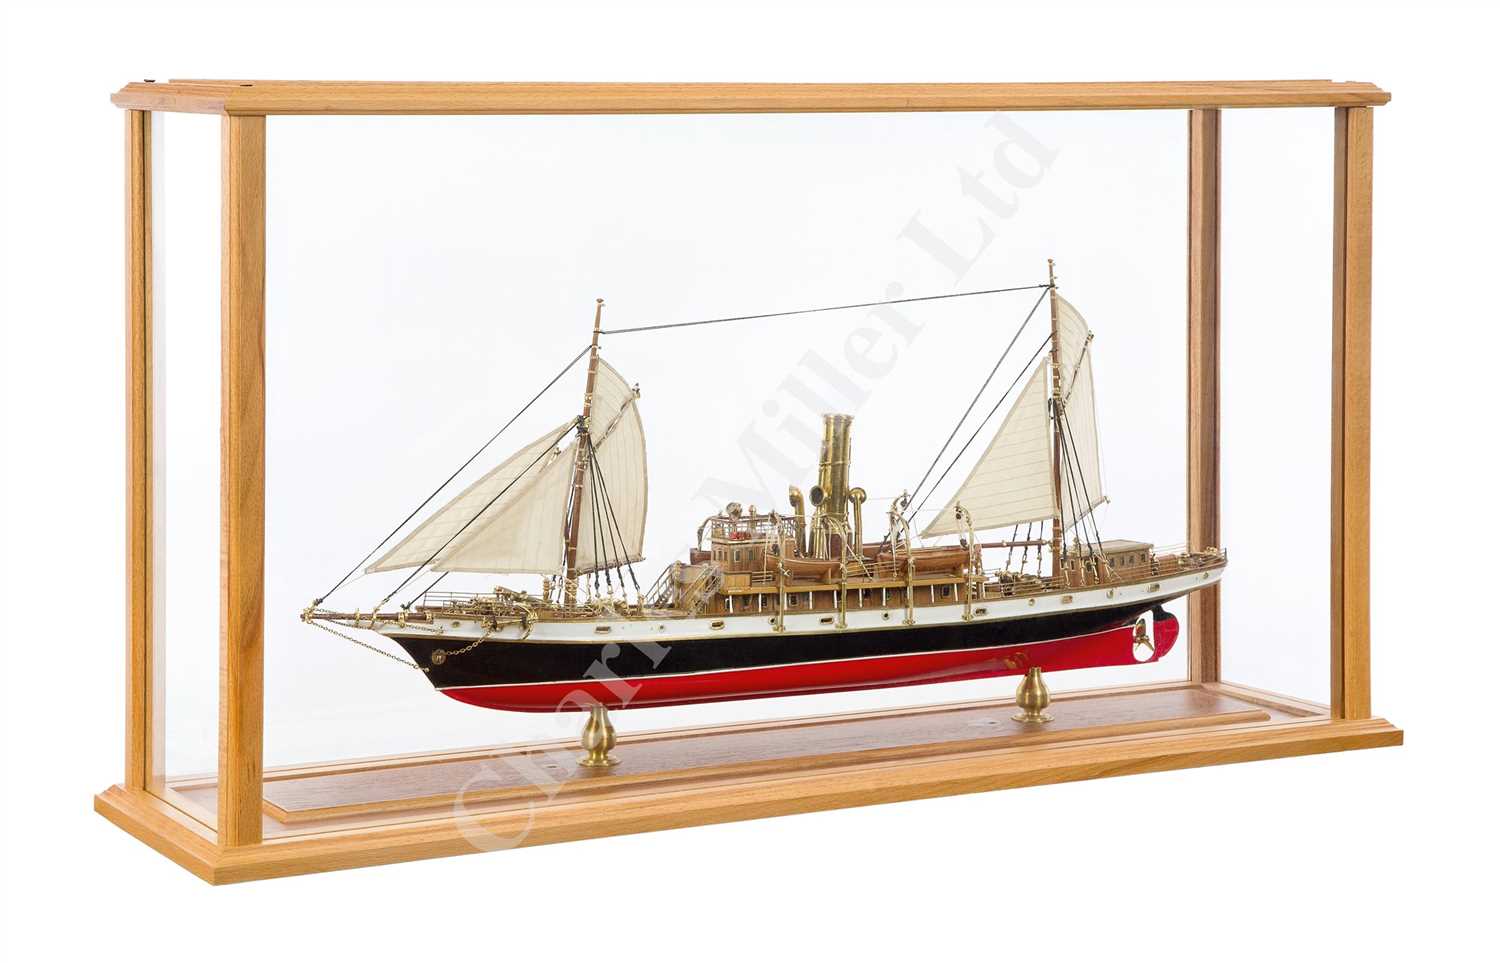 Lot 253 - A 1:65 SCALE STATIC DISPLAY MODEL FOR THE IMPERIAL RUSSIAN HARBOUR PATROL SHIP COMMANDER BERING [1905]